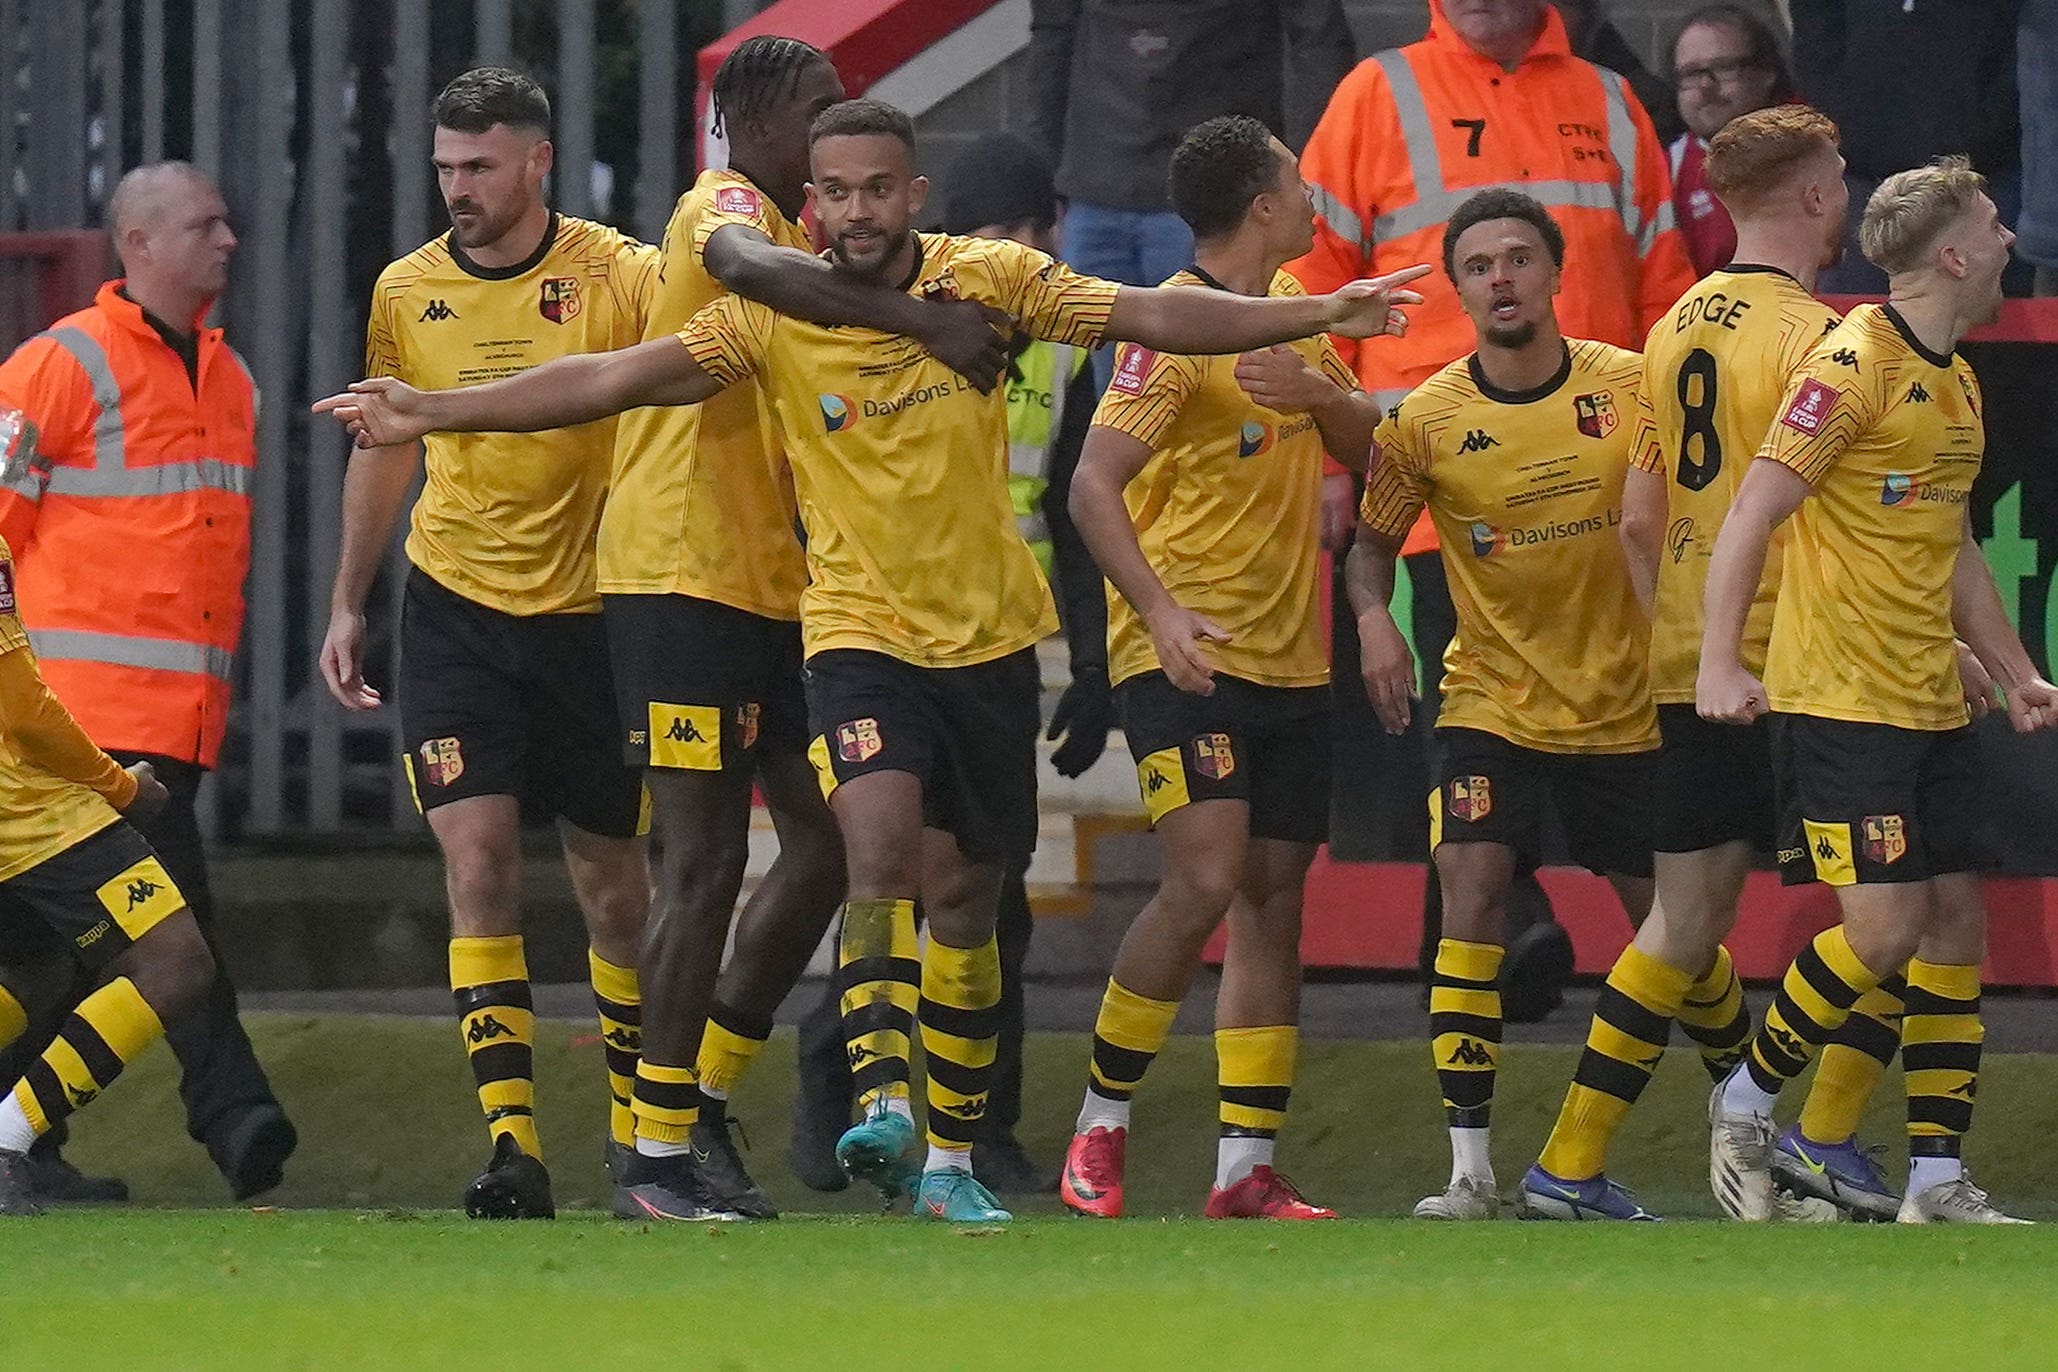 Alvechurch may be eyeing another League scalp in the FA Cup (Adam Davy/PA)